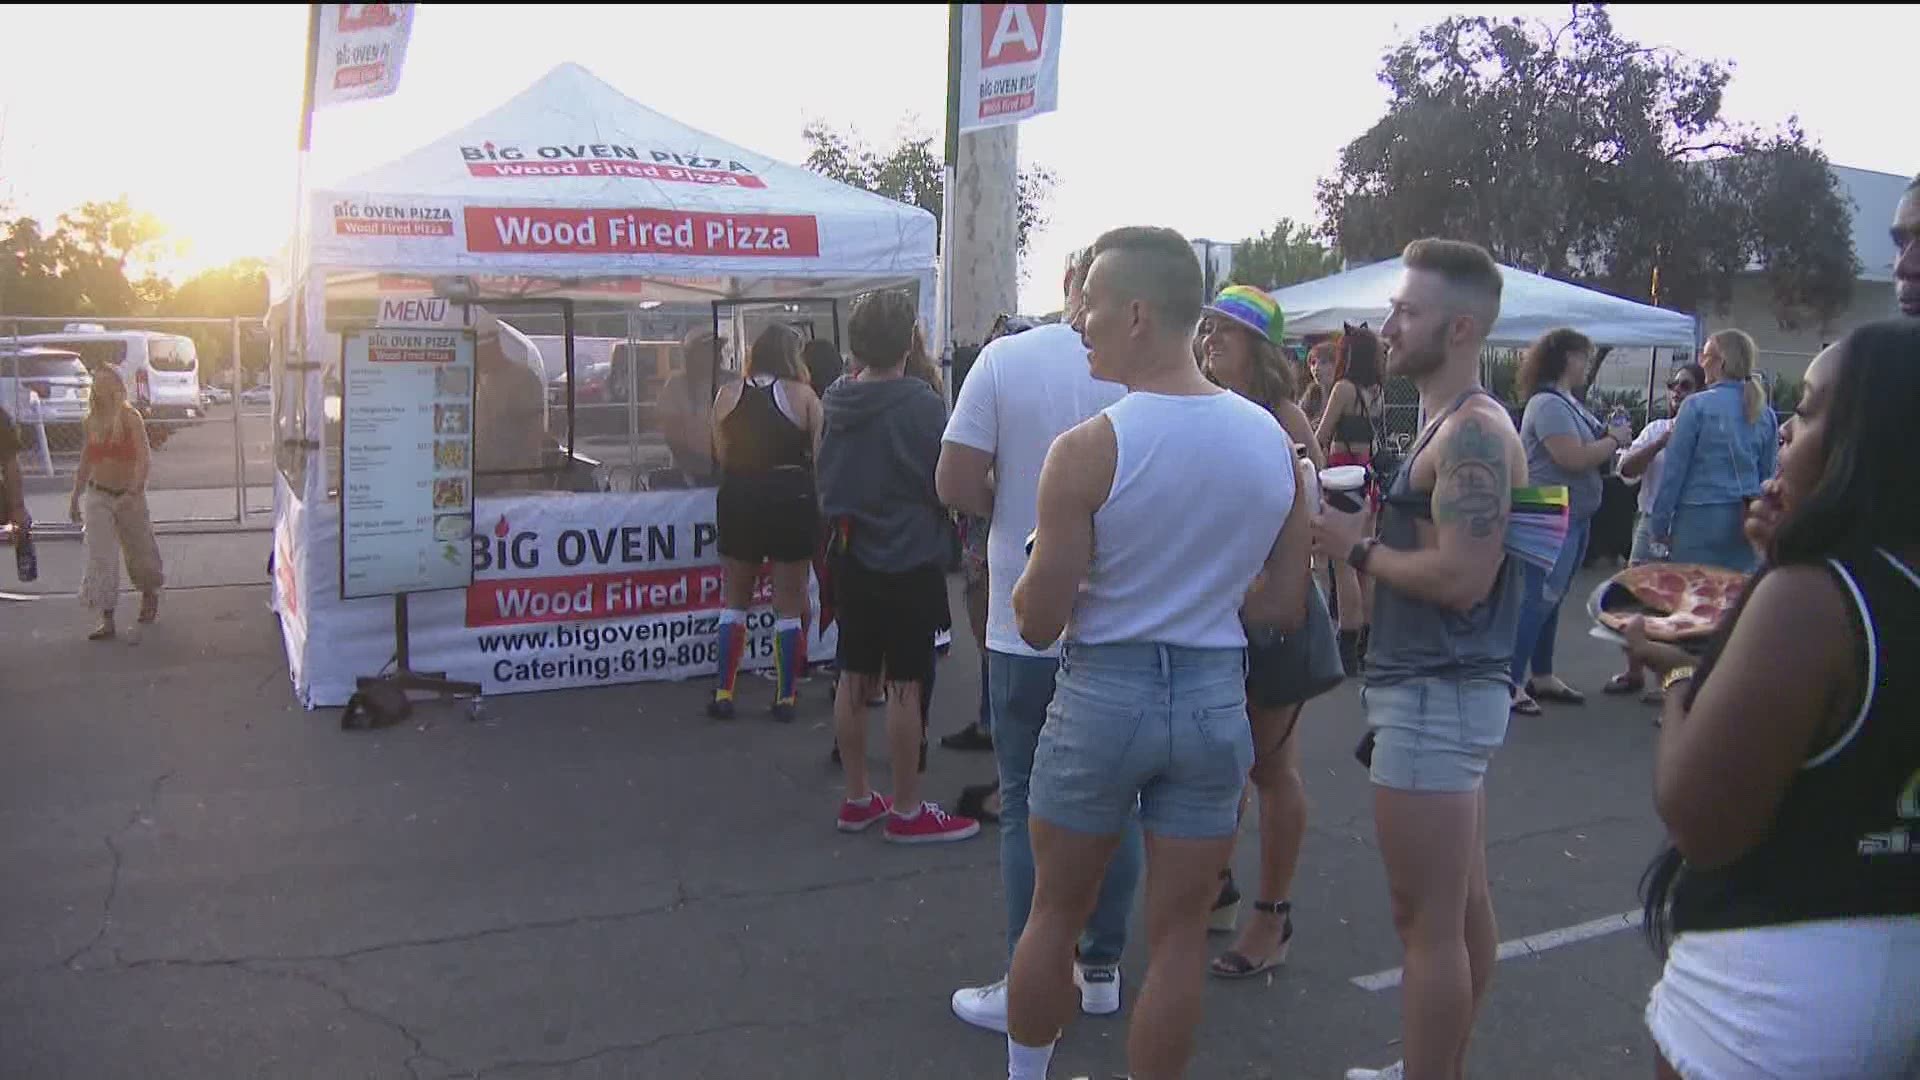 While Pride is a fun way for the LGBTQ+ community to get together, there's more to this event that helps San Diego economically.